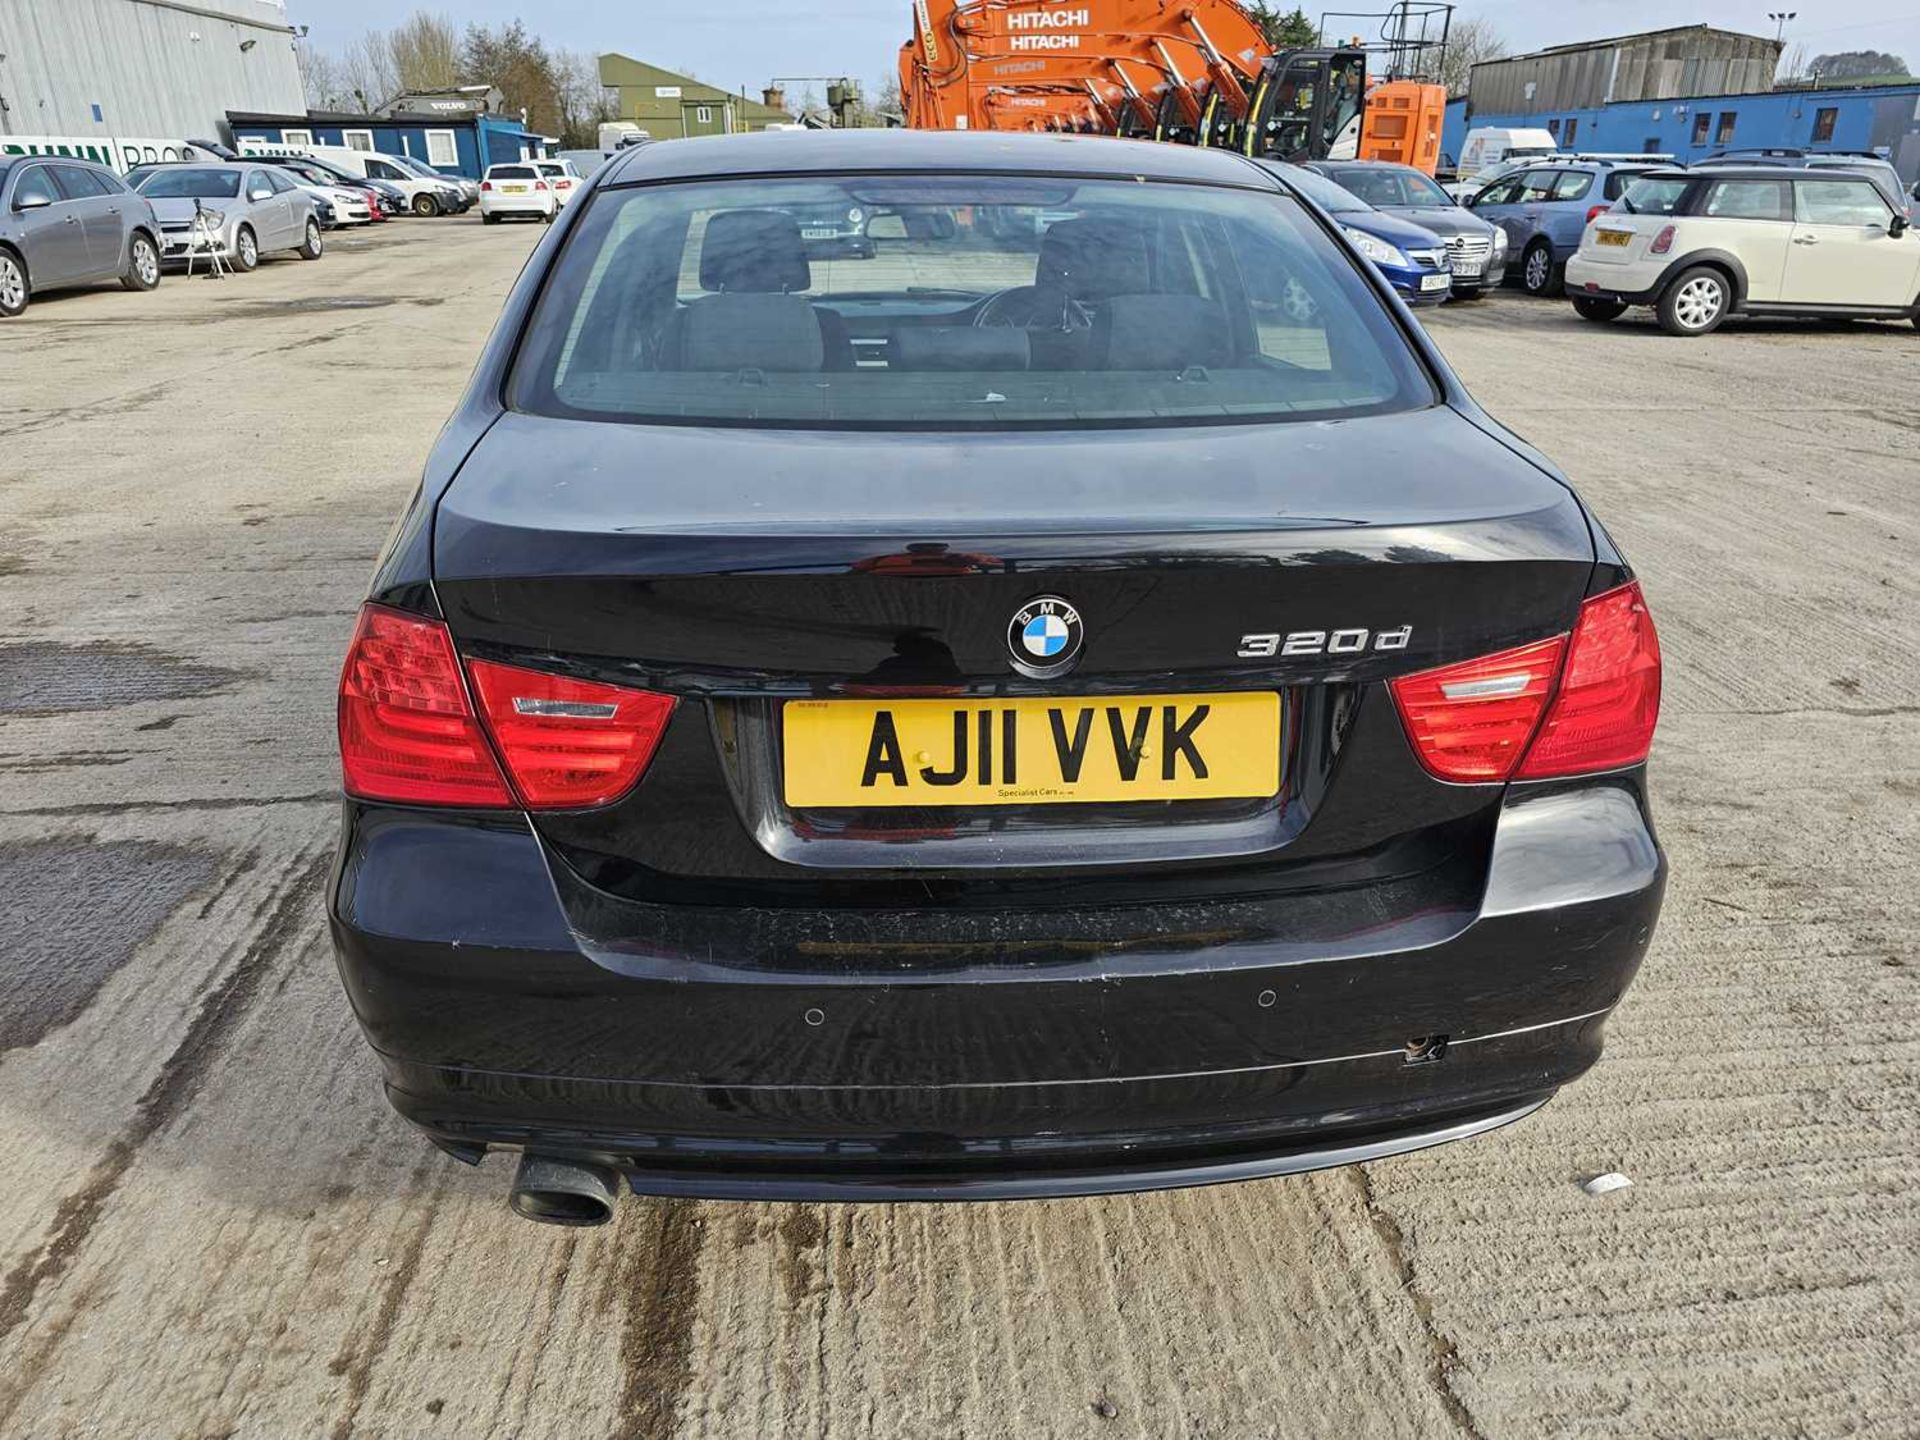 2011 BMW 320D, 6 Speed, Parking Sensors, Bluetooth, A/C (Reg. Docs. Available, Tested 01/25) - Image 5 of 28